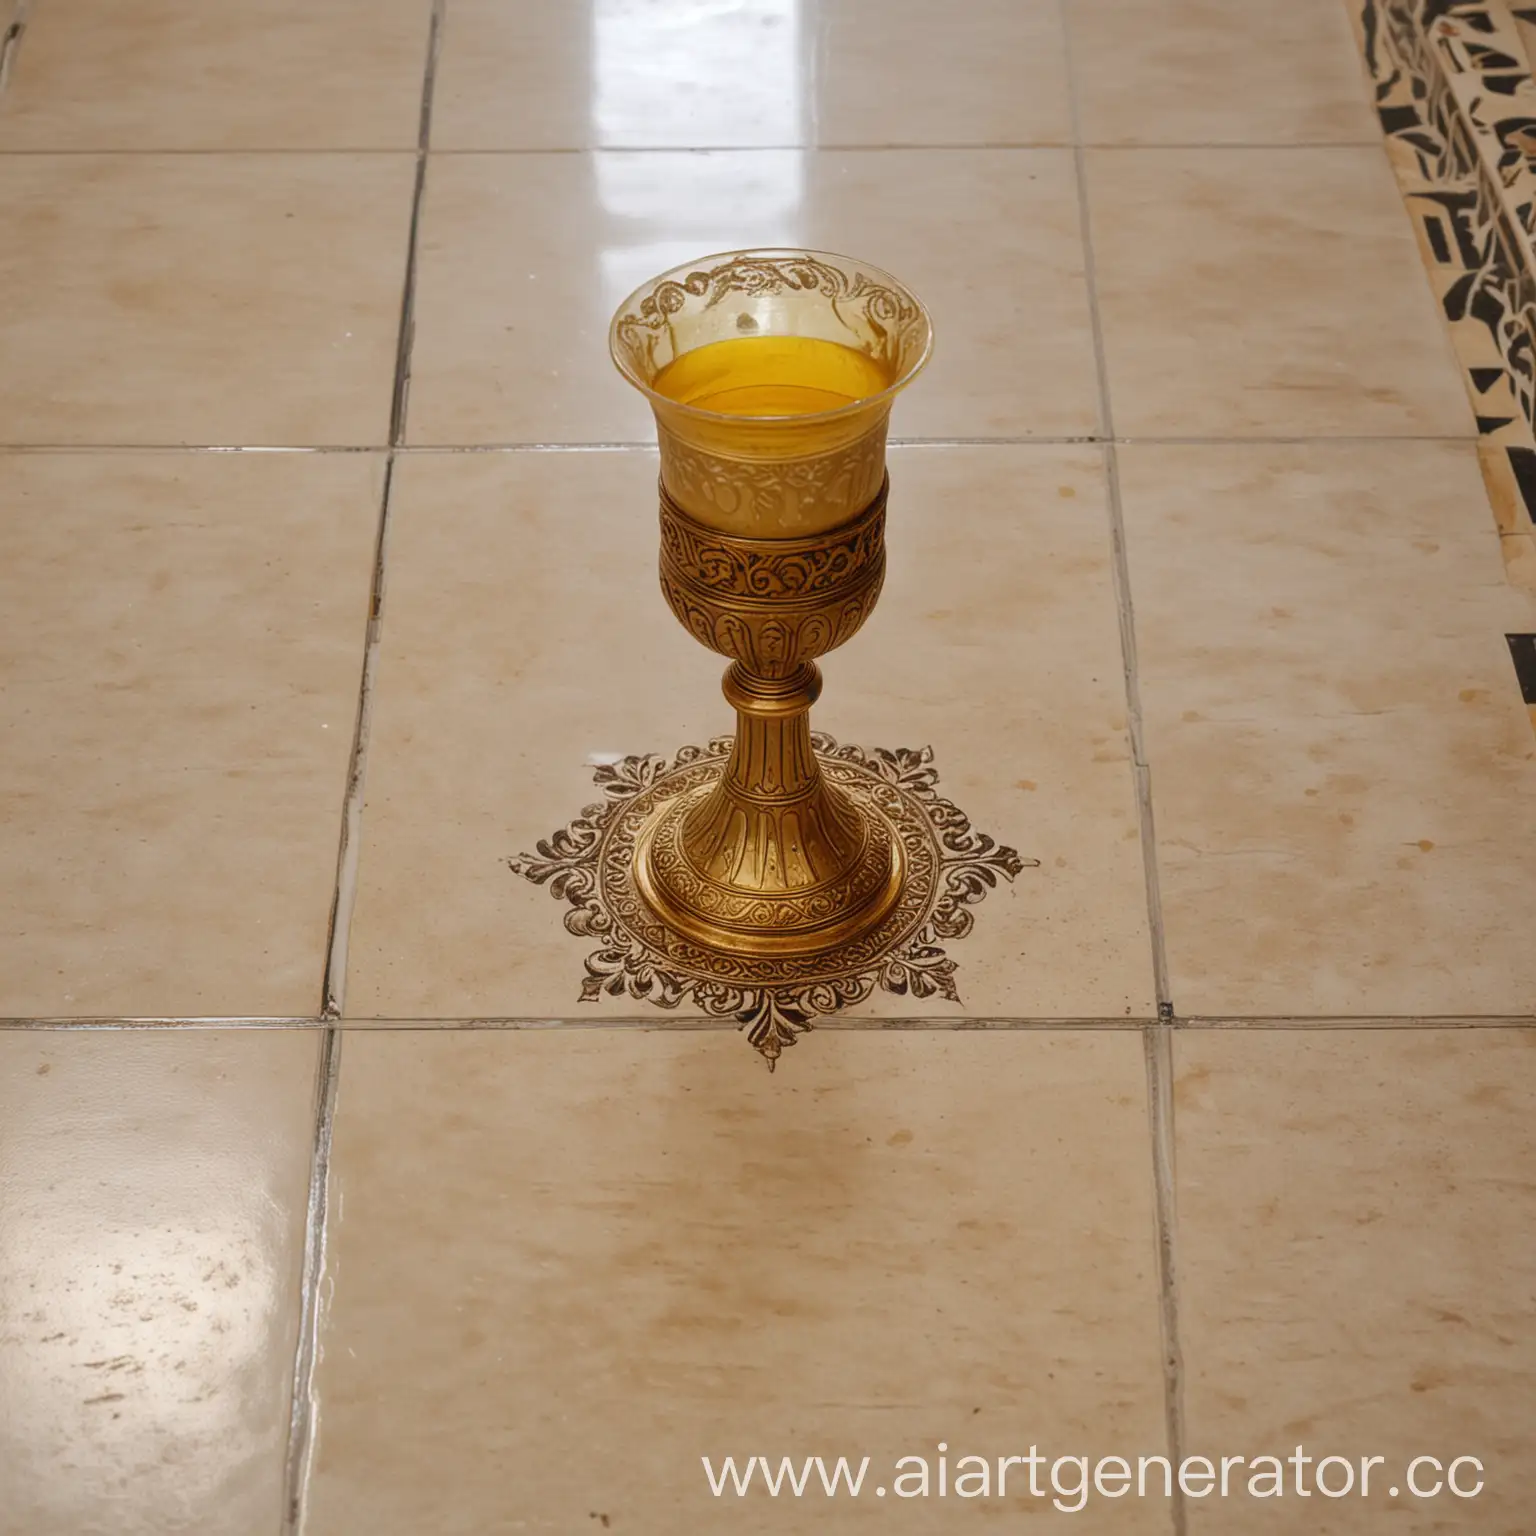 Tall golden grail with yellow water inside on the tiled floor. 